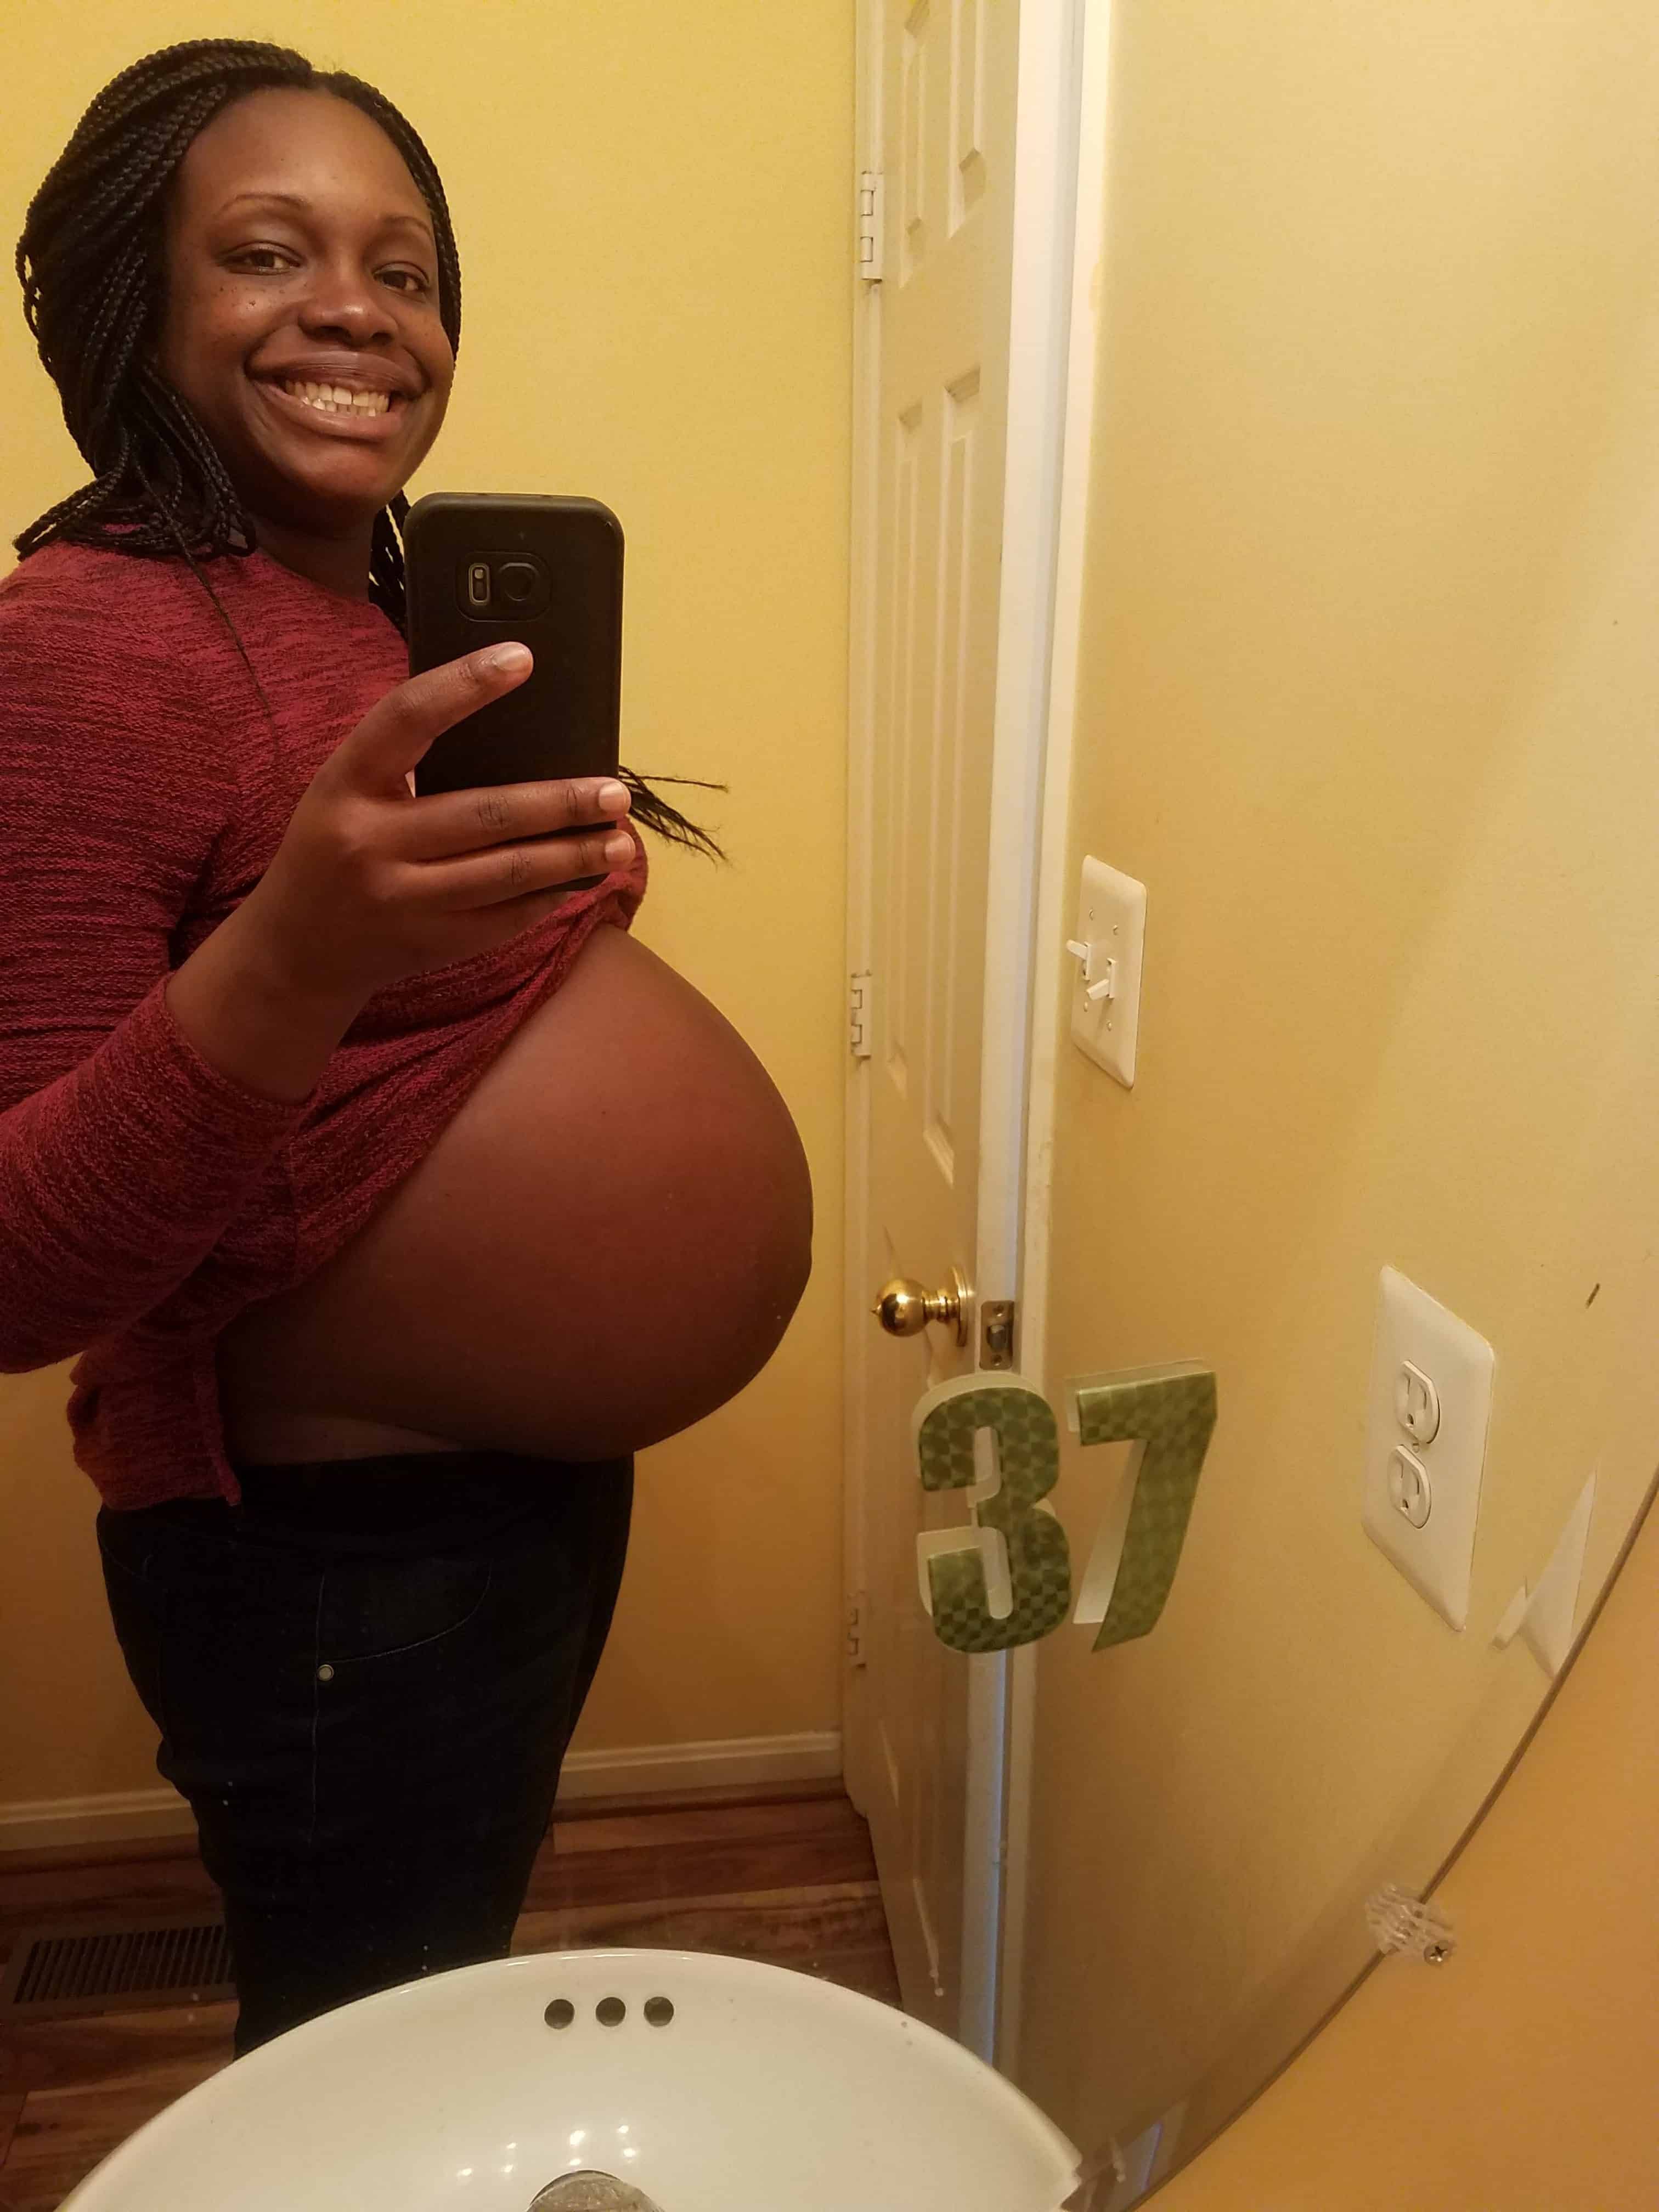 37 weeks pregnant with twins